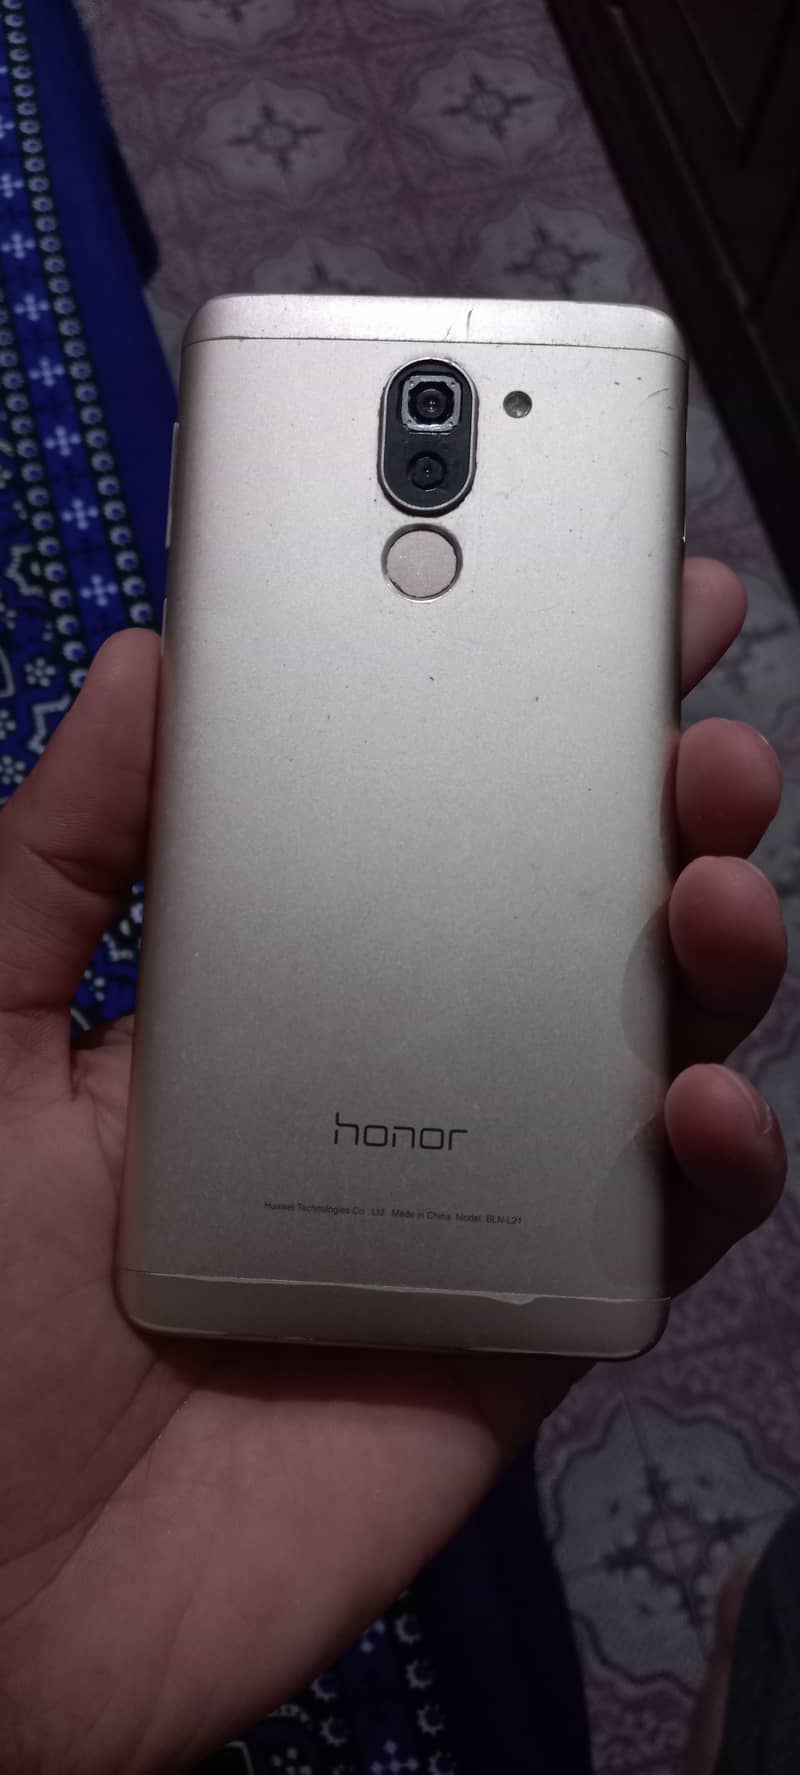 Huawei Honor 6x storage 3/32 for sale in good condition 5